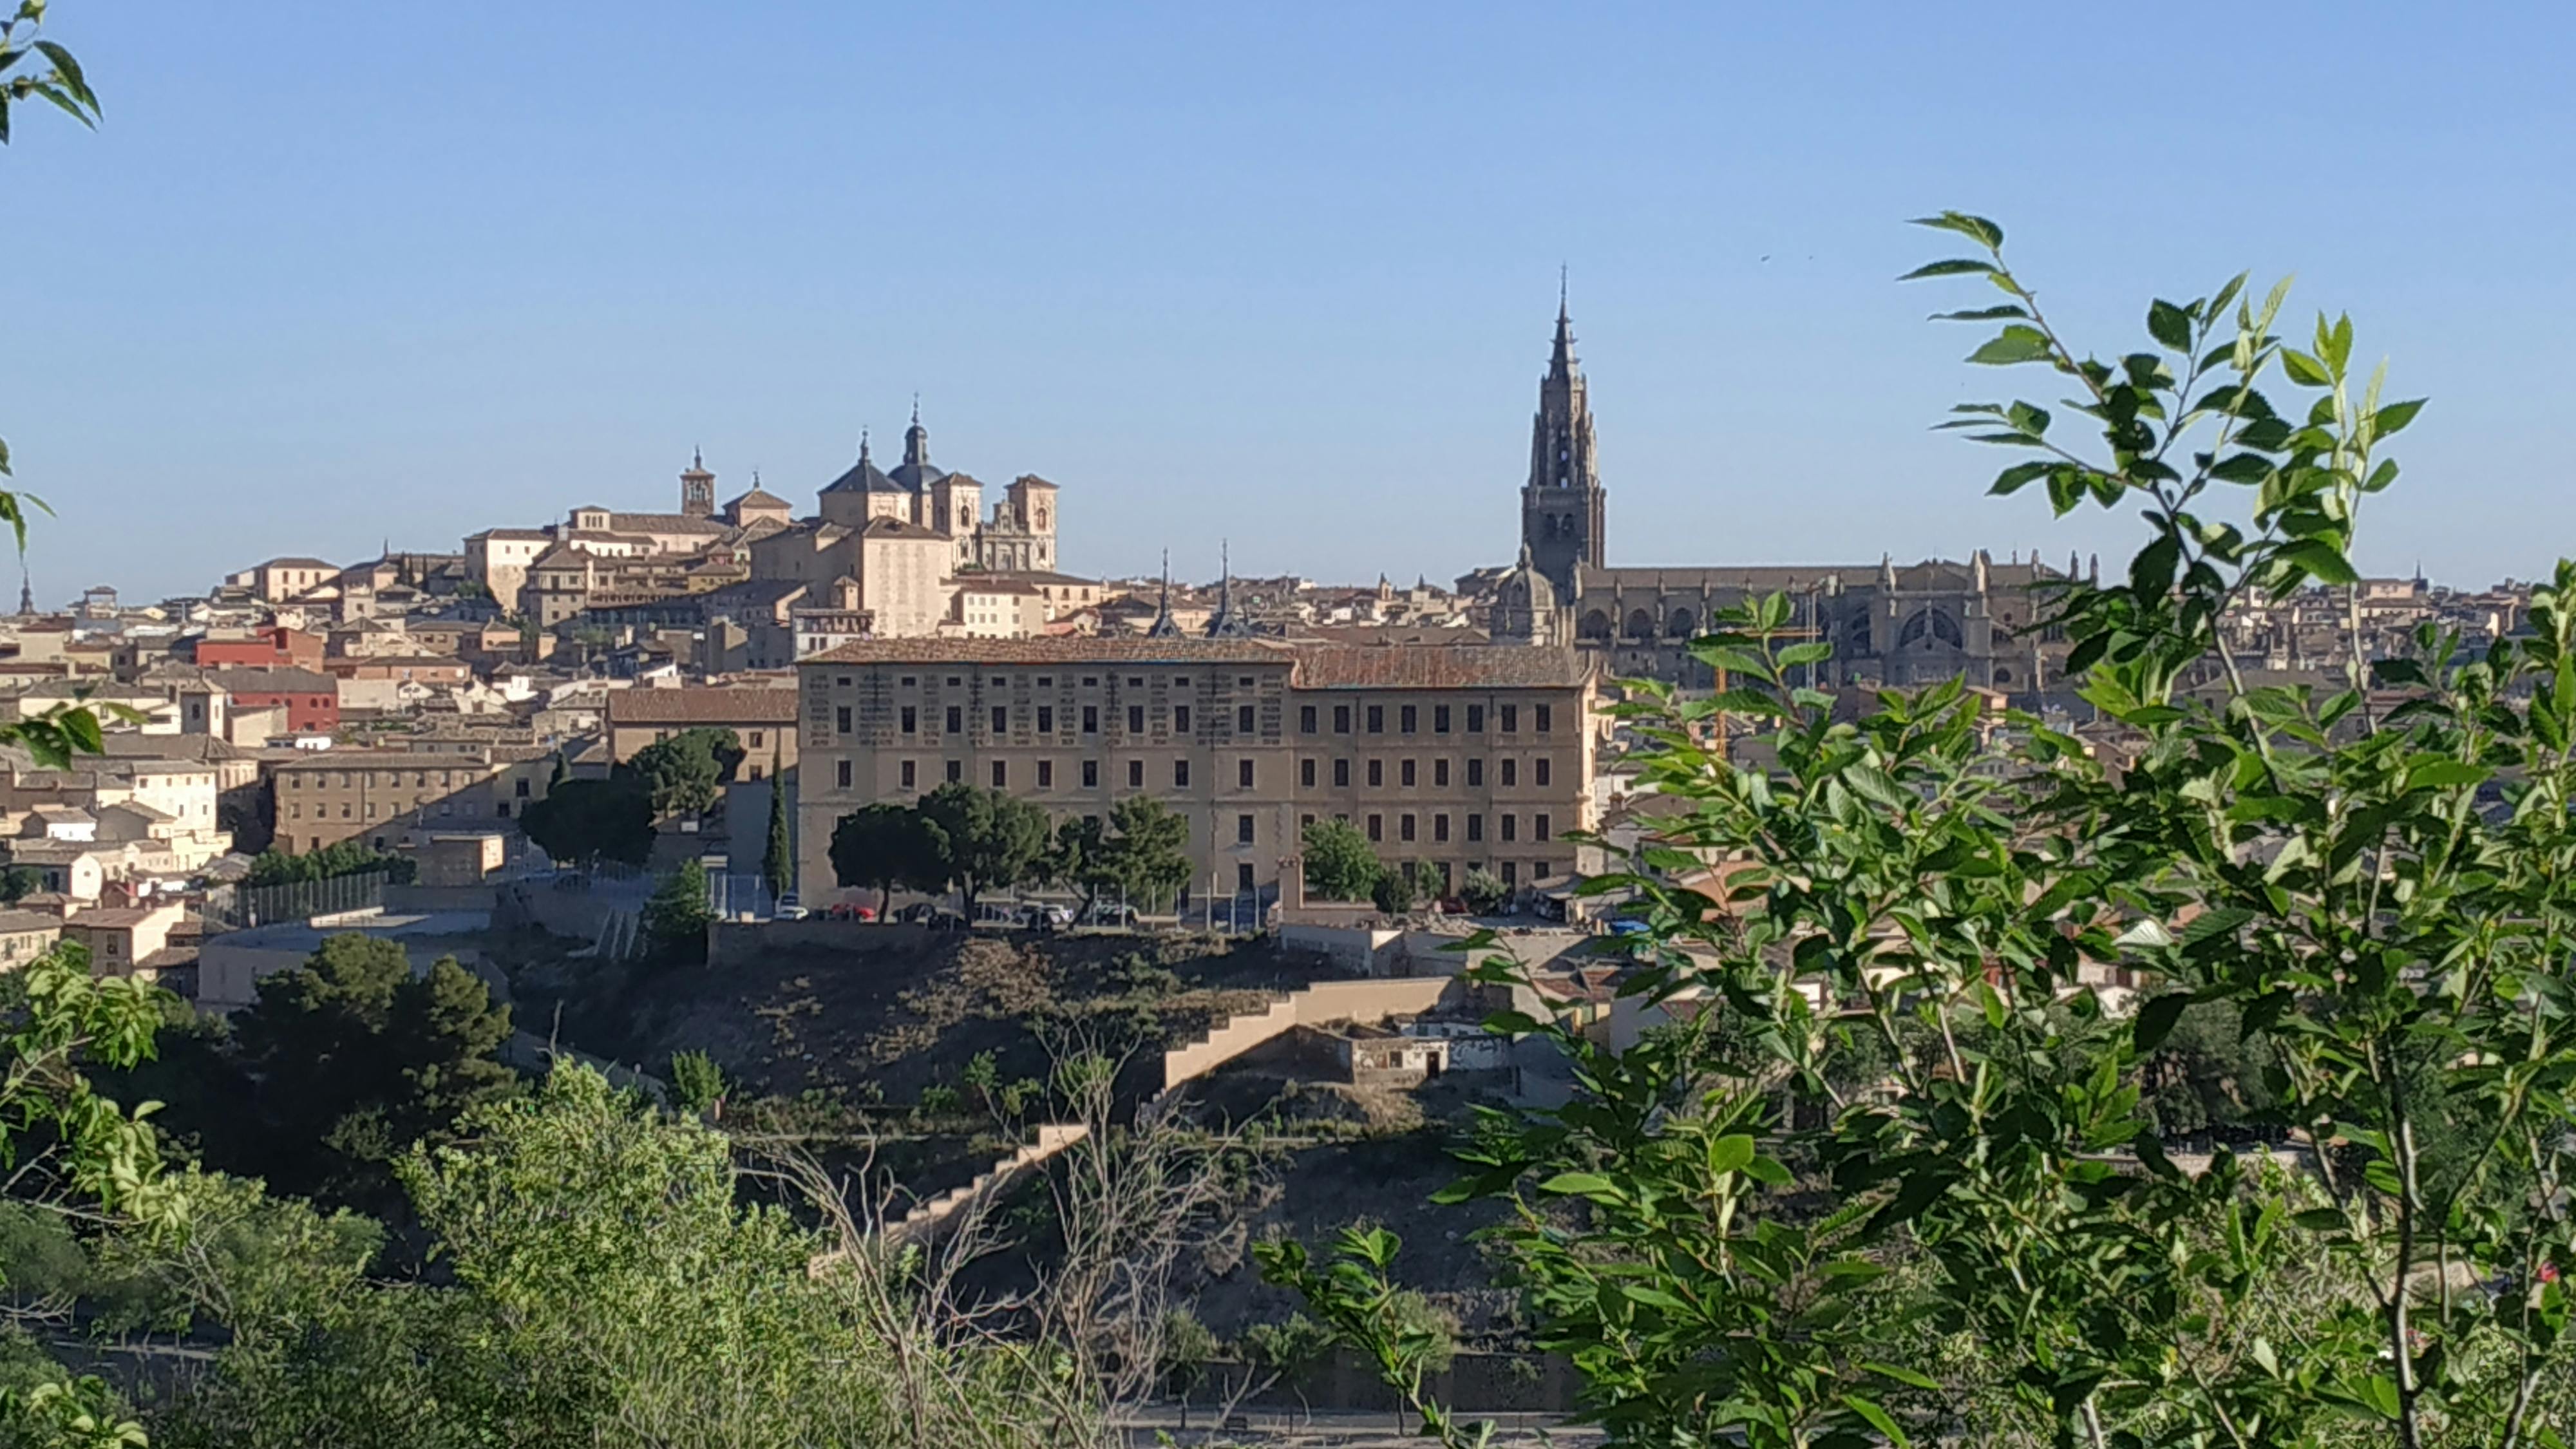 Full-day trip to Toledo by bus from Madrid